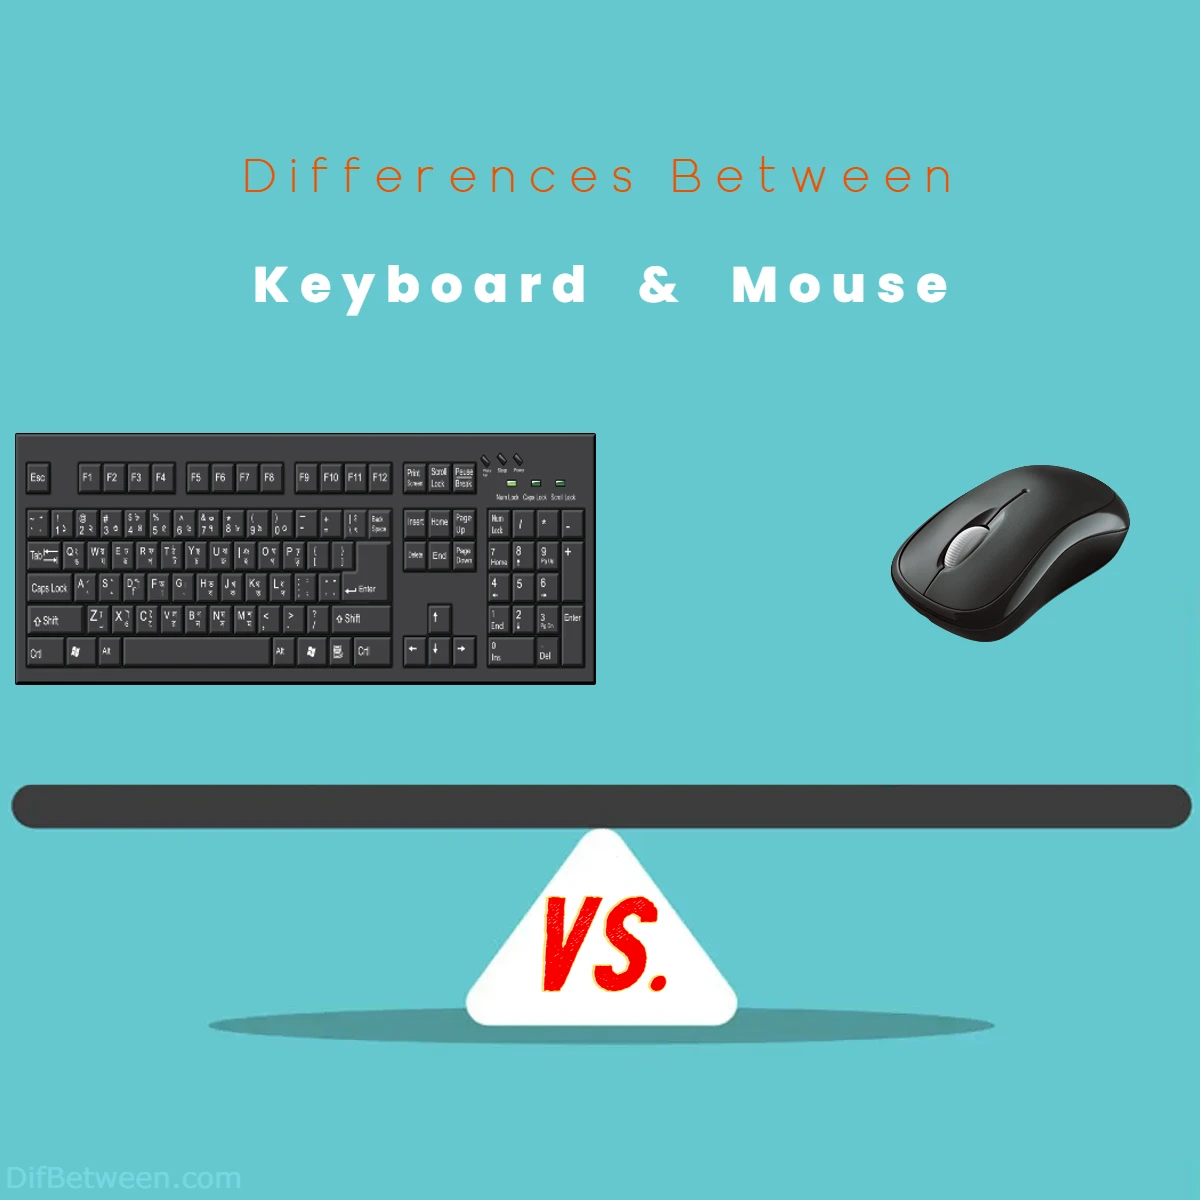 Differences Between Keyboard vs Mouse